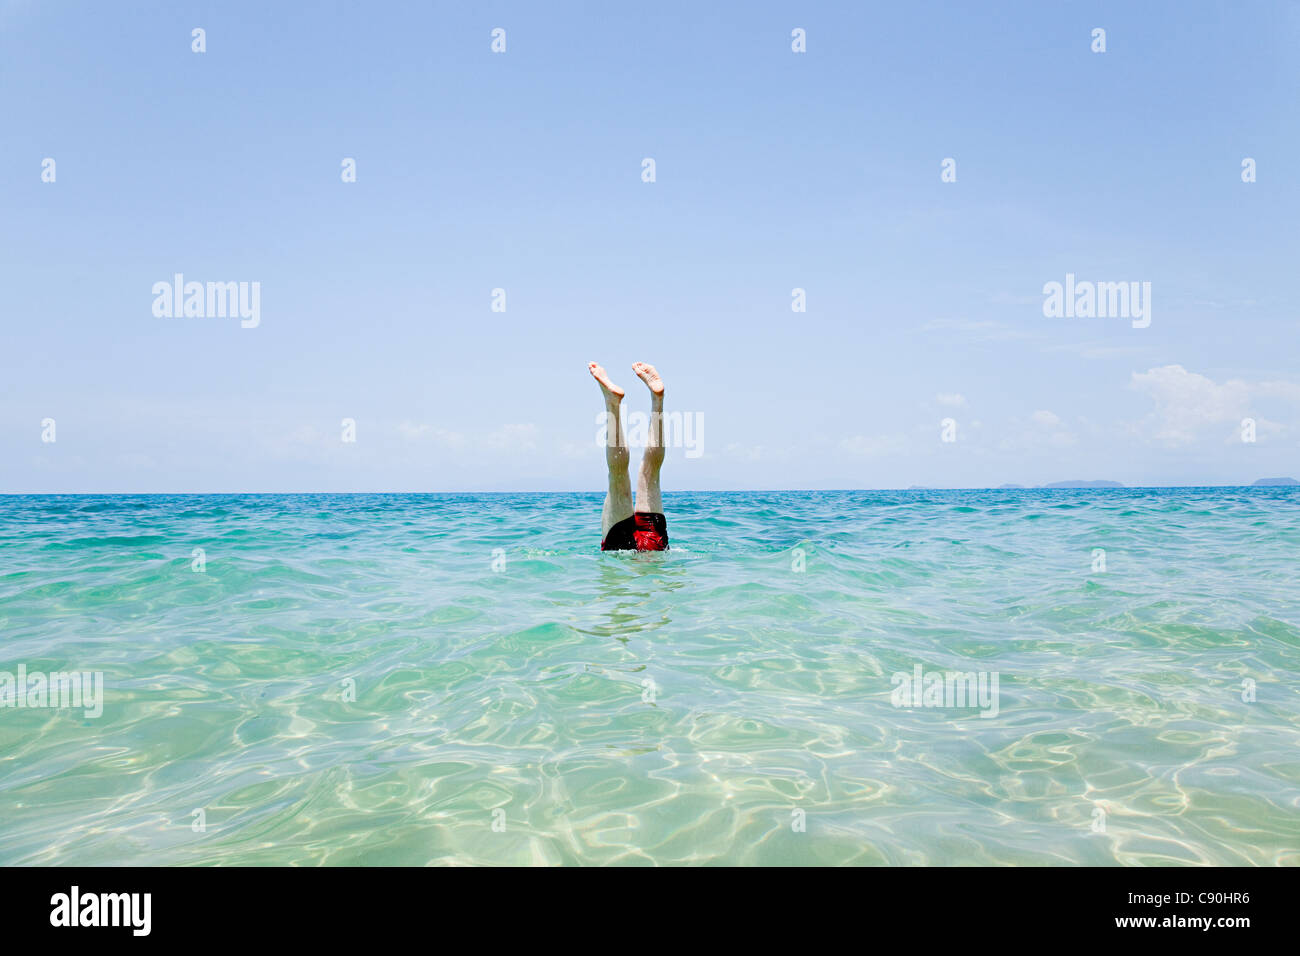 Swimmer with legs sticking out of water off Penhentian Kecil, Perhentian Islands, Malaysia Stock Photo